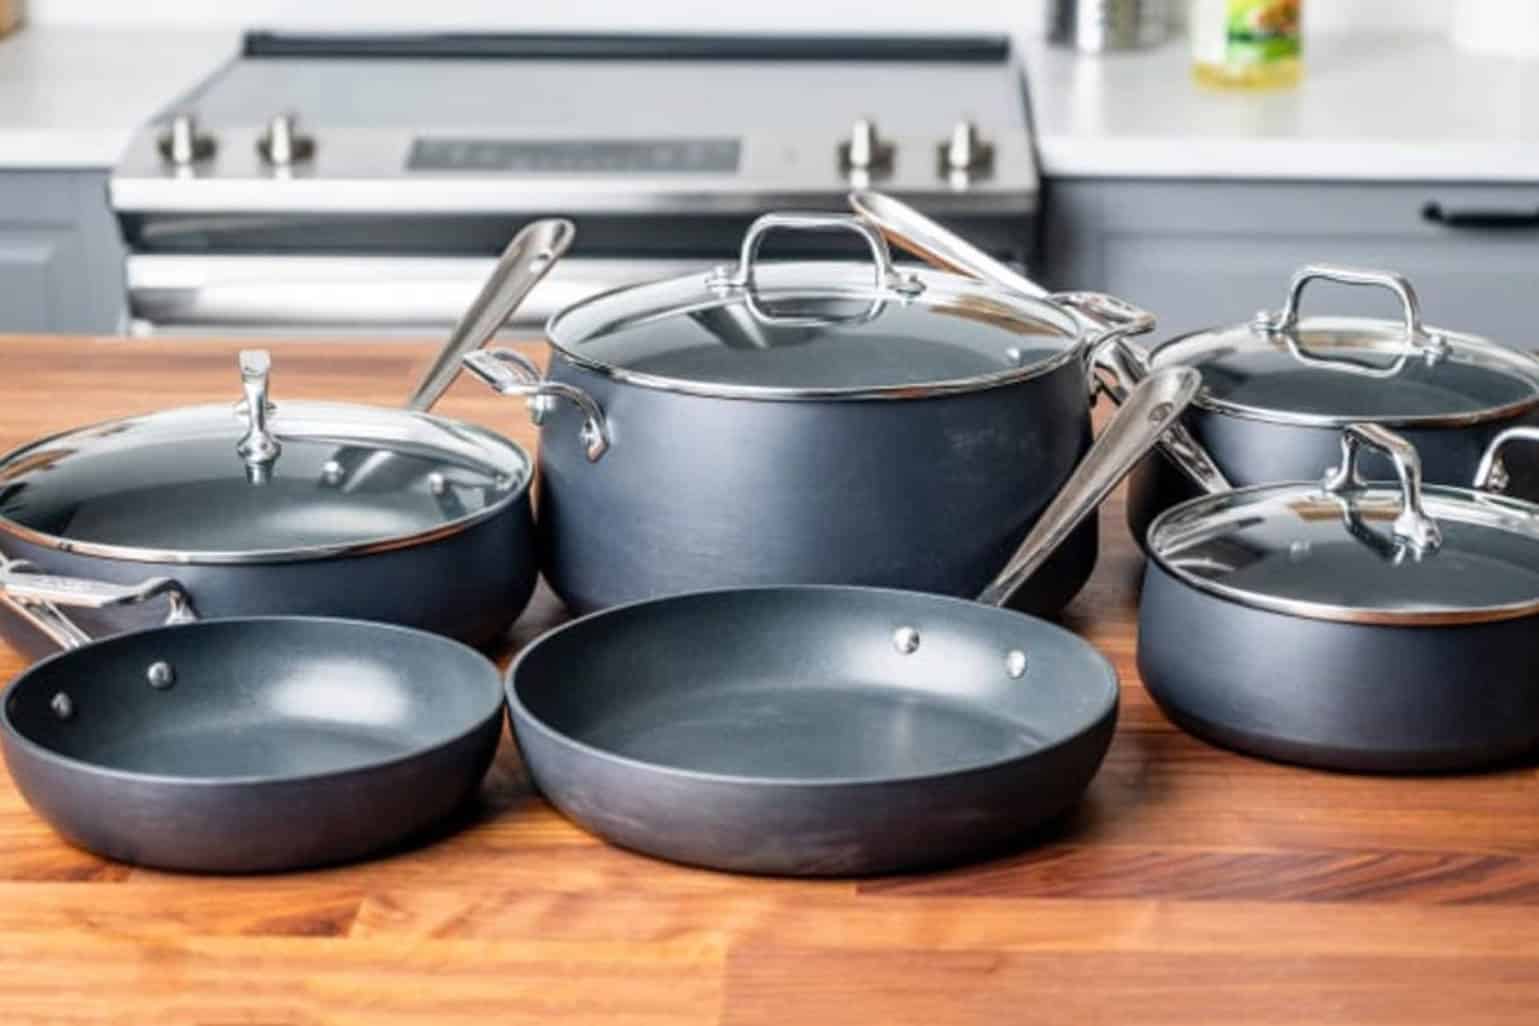 All-Clad Hard-Anodized Cookware Set